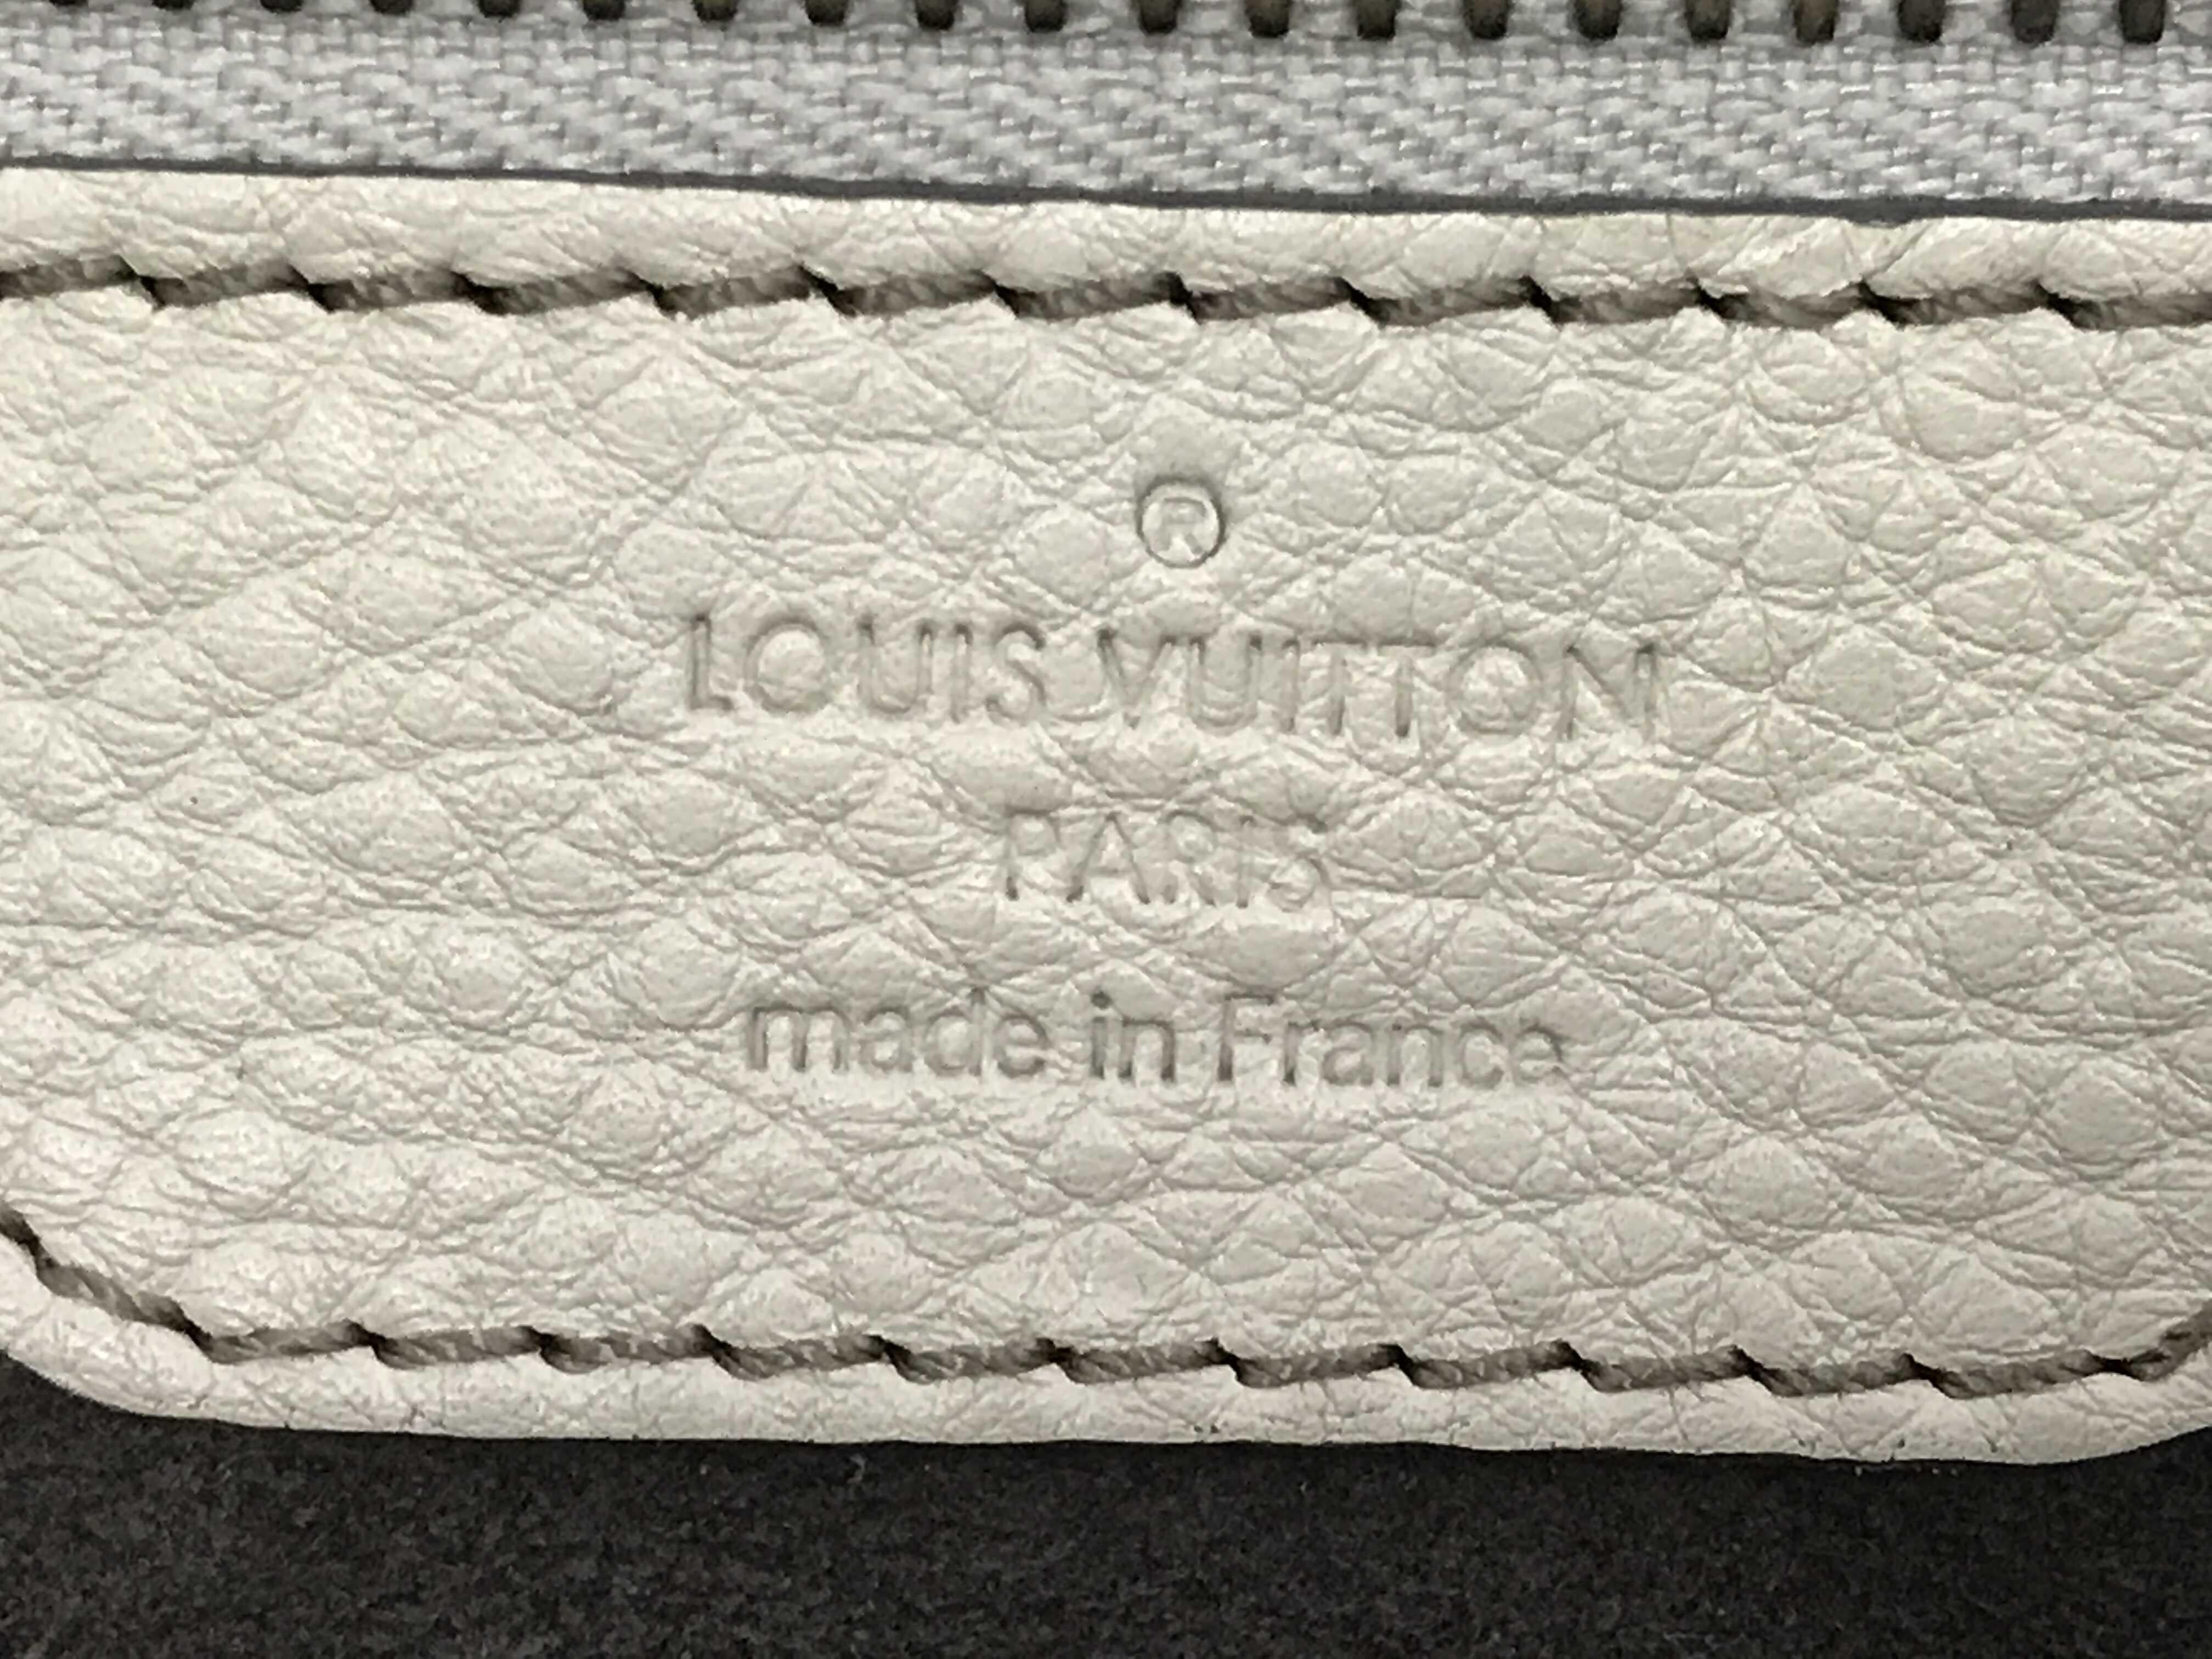 Louis Vuitton White Monogram Mahina Leather XL Hobo Bag In Good Condition For Sale In Irvine, CA